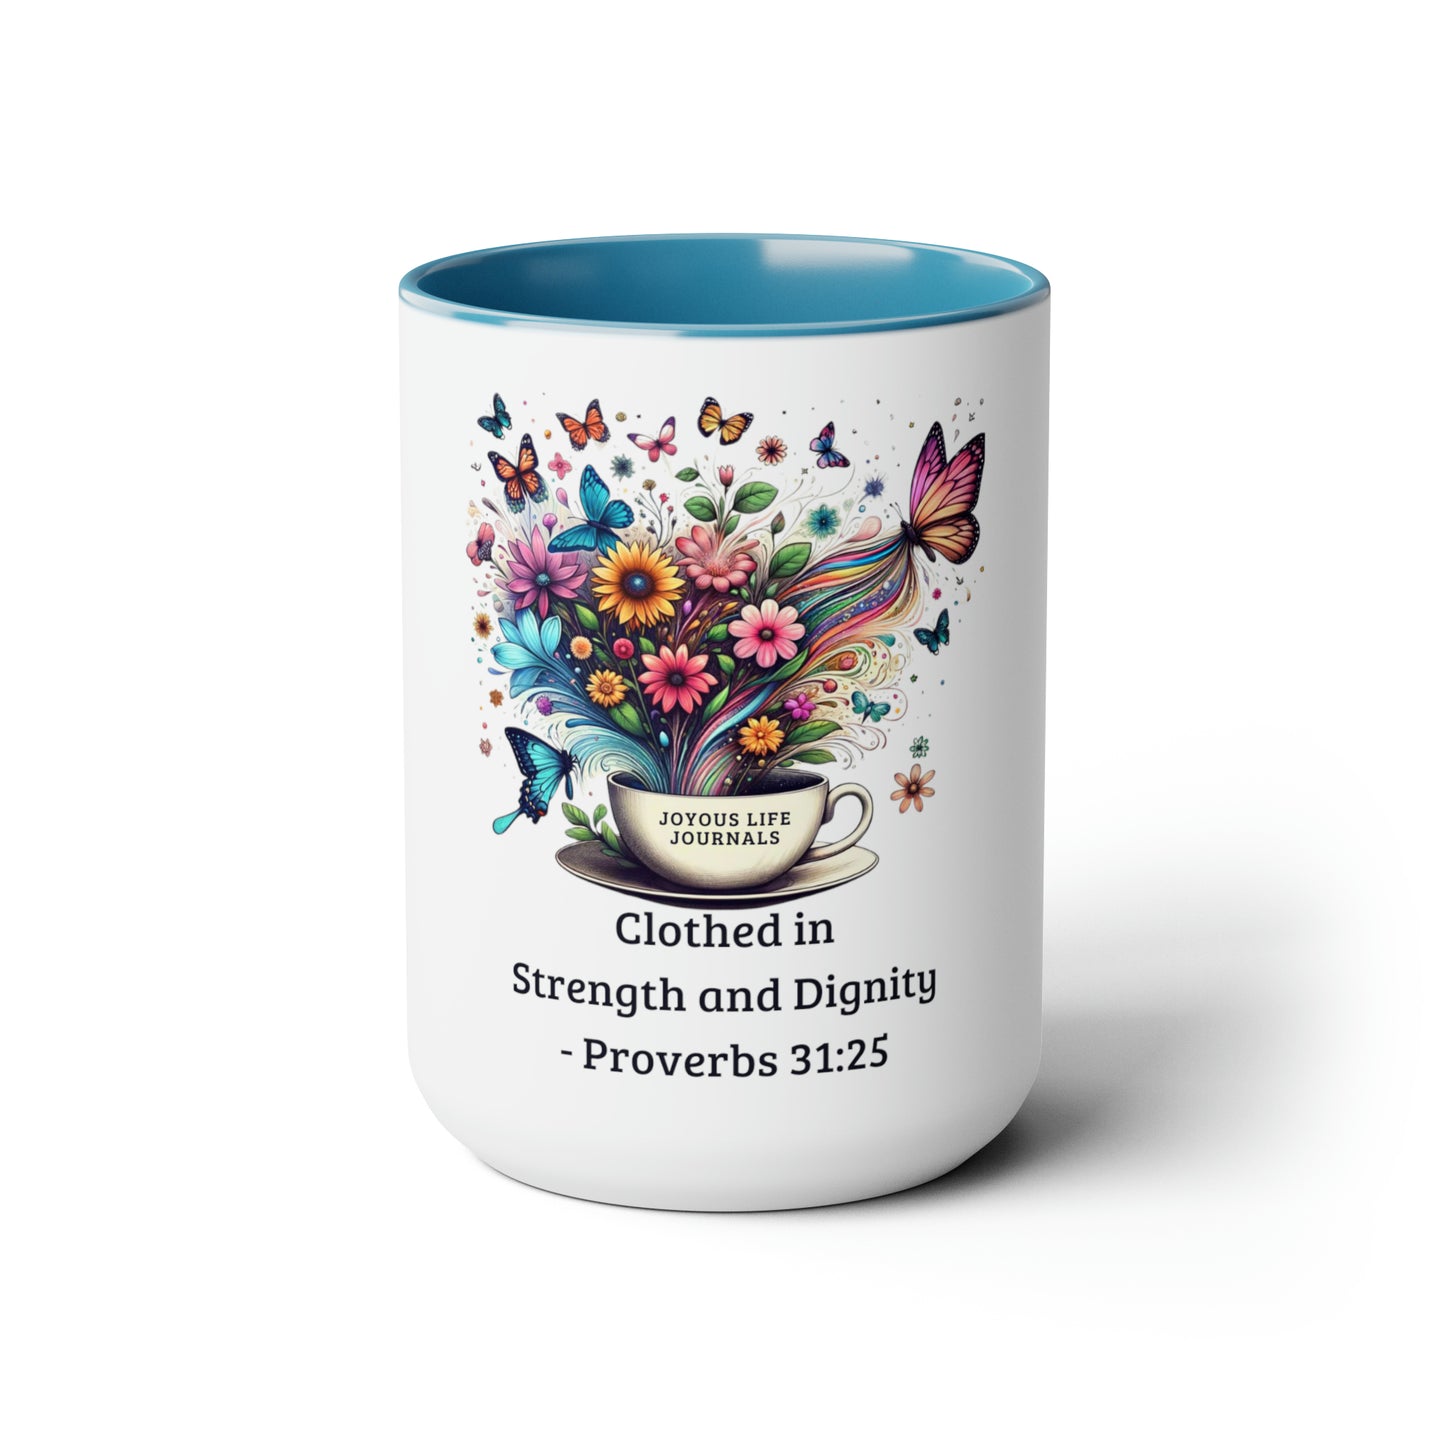 Elegance in Bloom: 'Clothed in Strength and Dignity' Proverbs 31:25 Two-Tone Mug, Joyous Life Journals